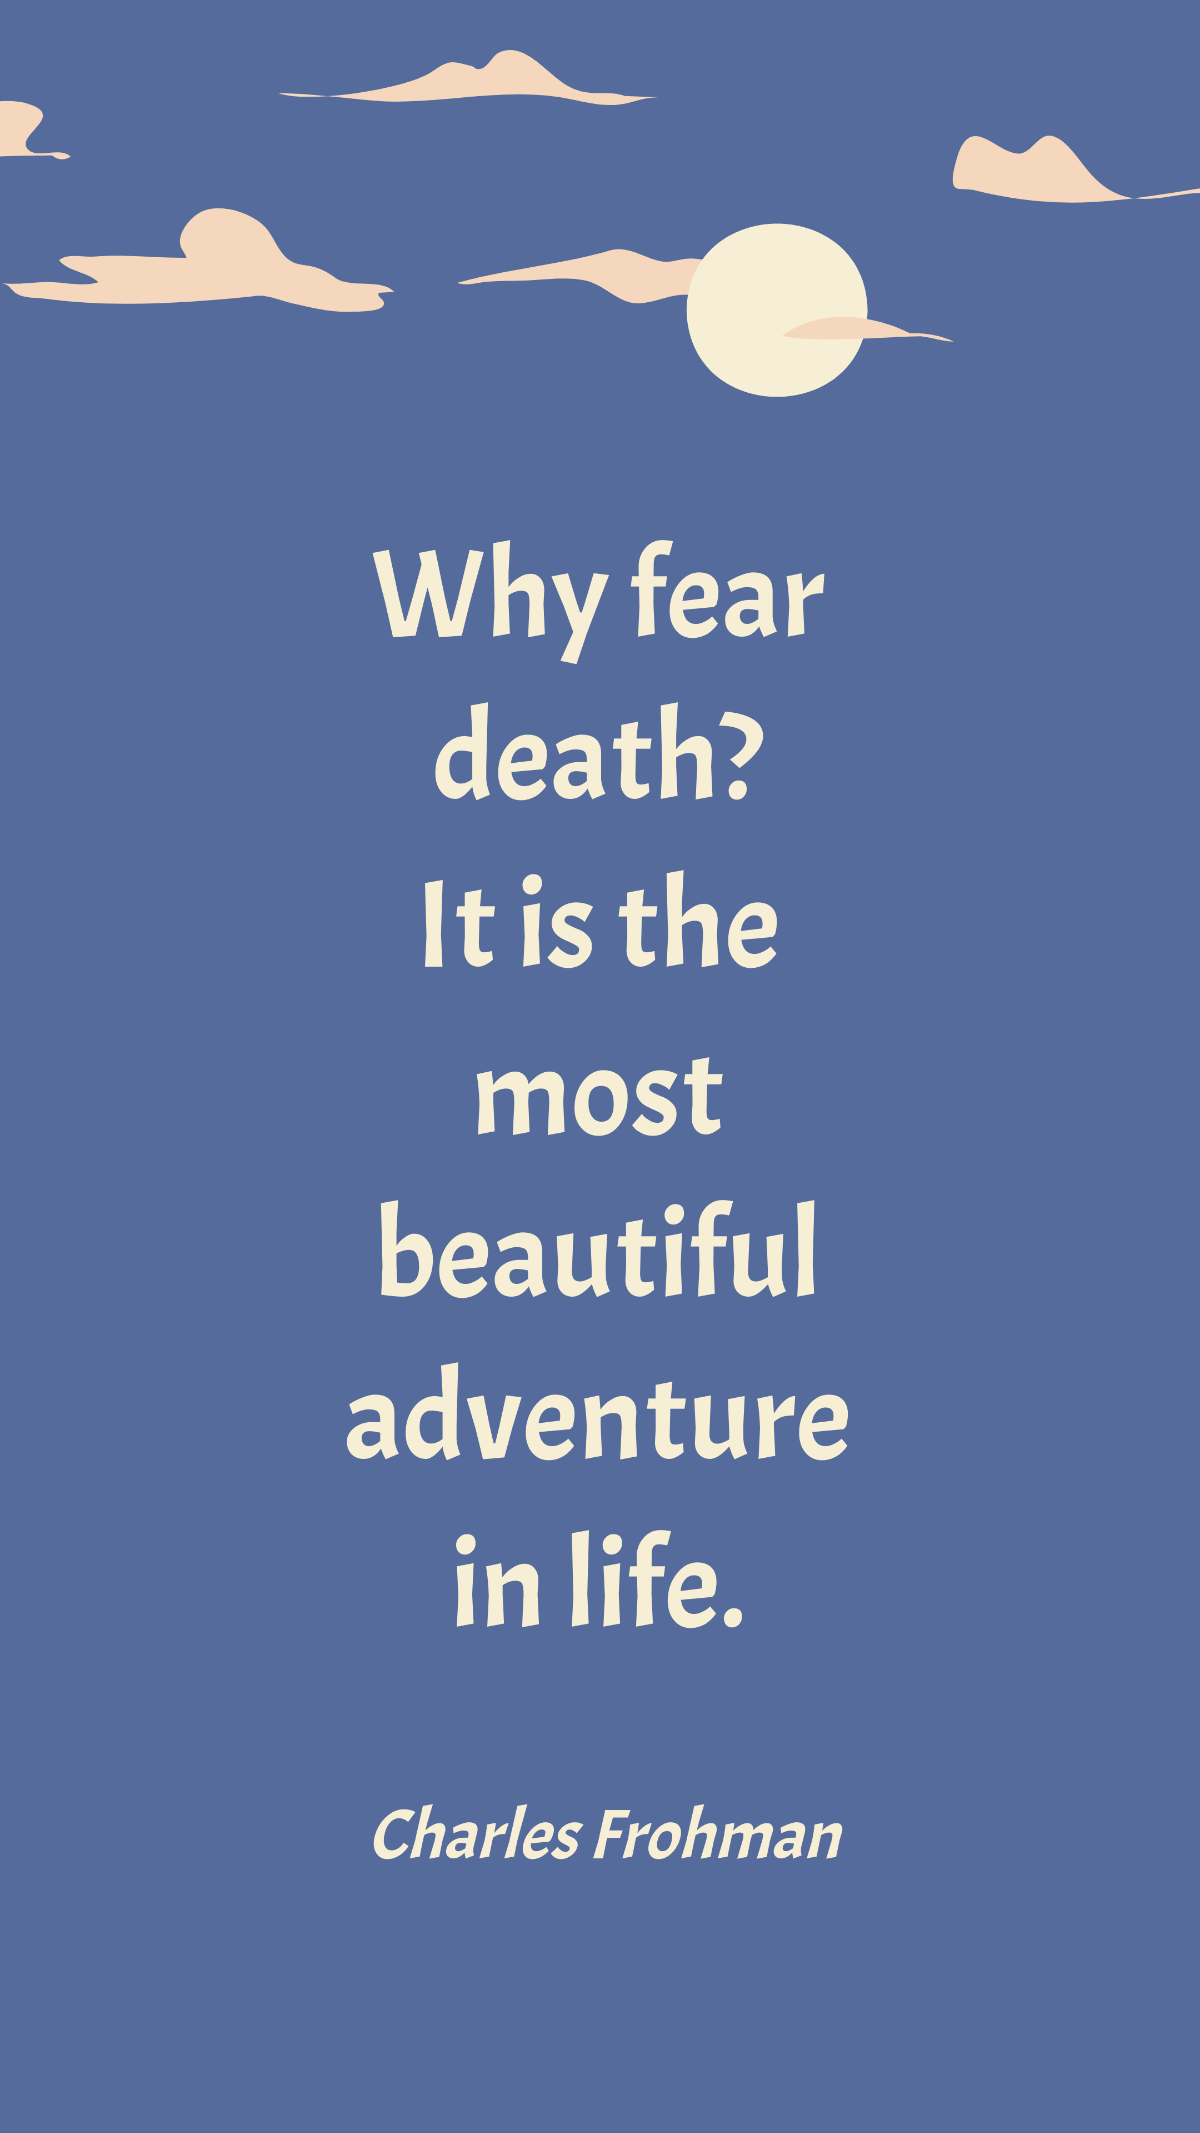 Free Charles Frohman - Why fear death? It is the most beautiful adventure in life. Template